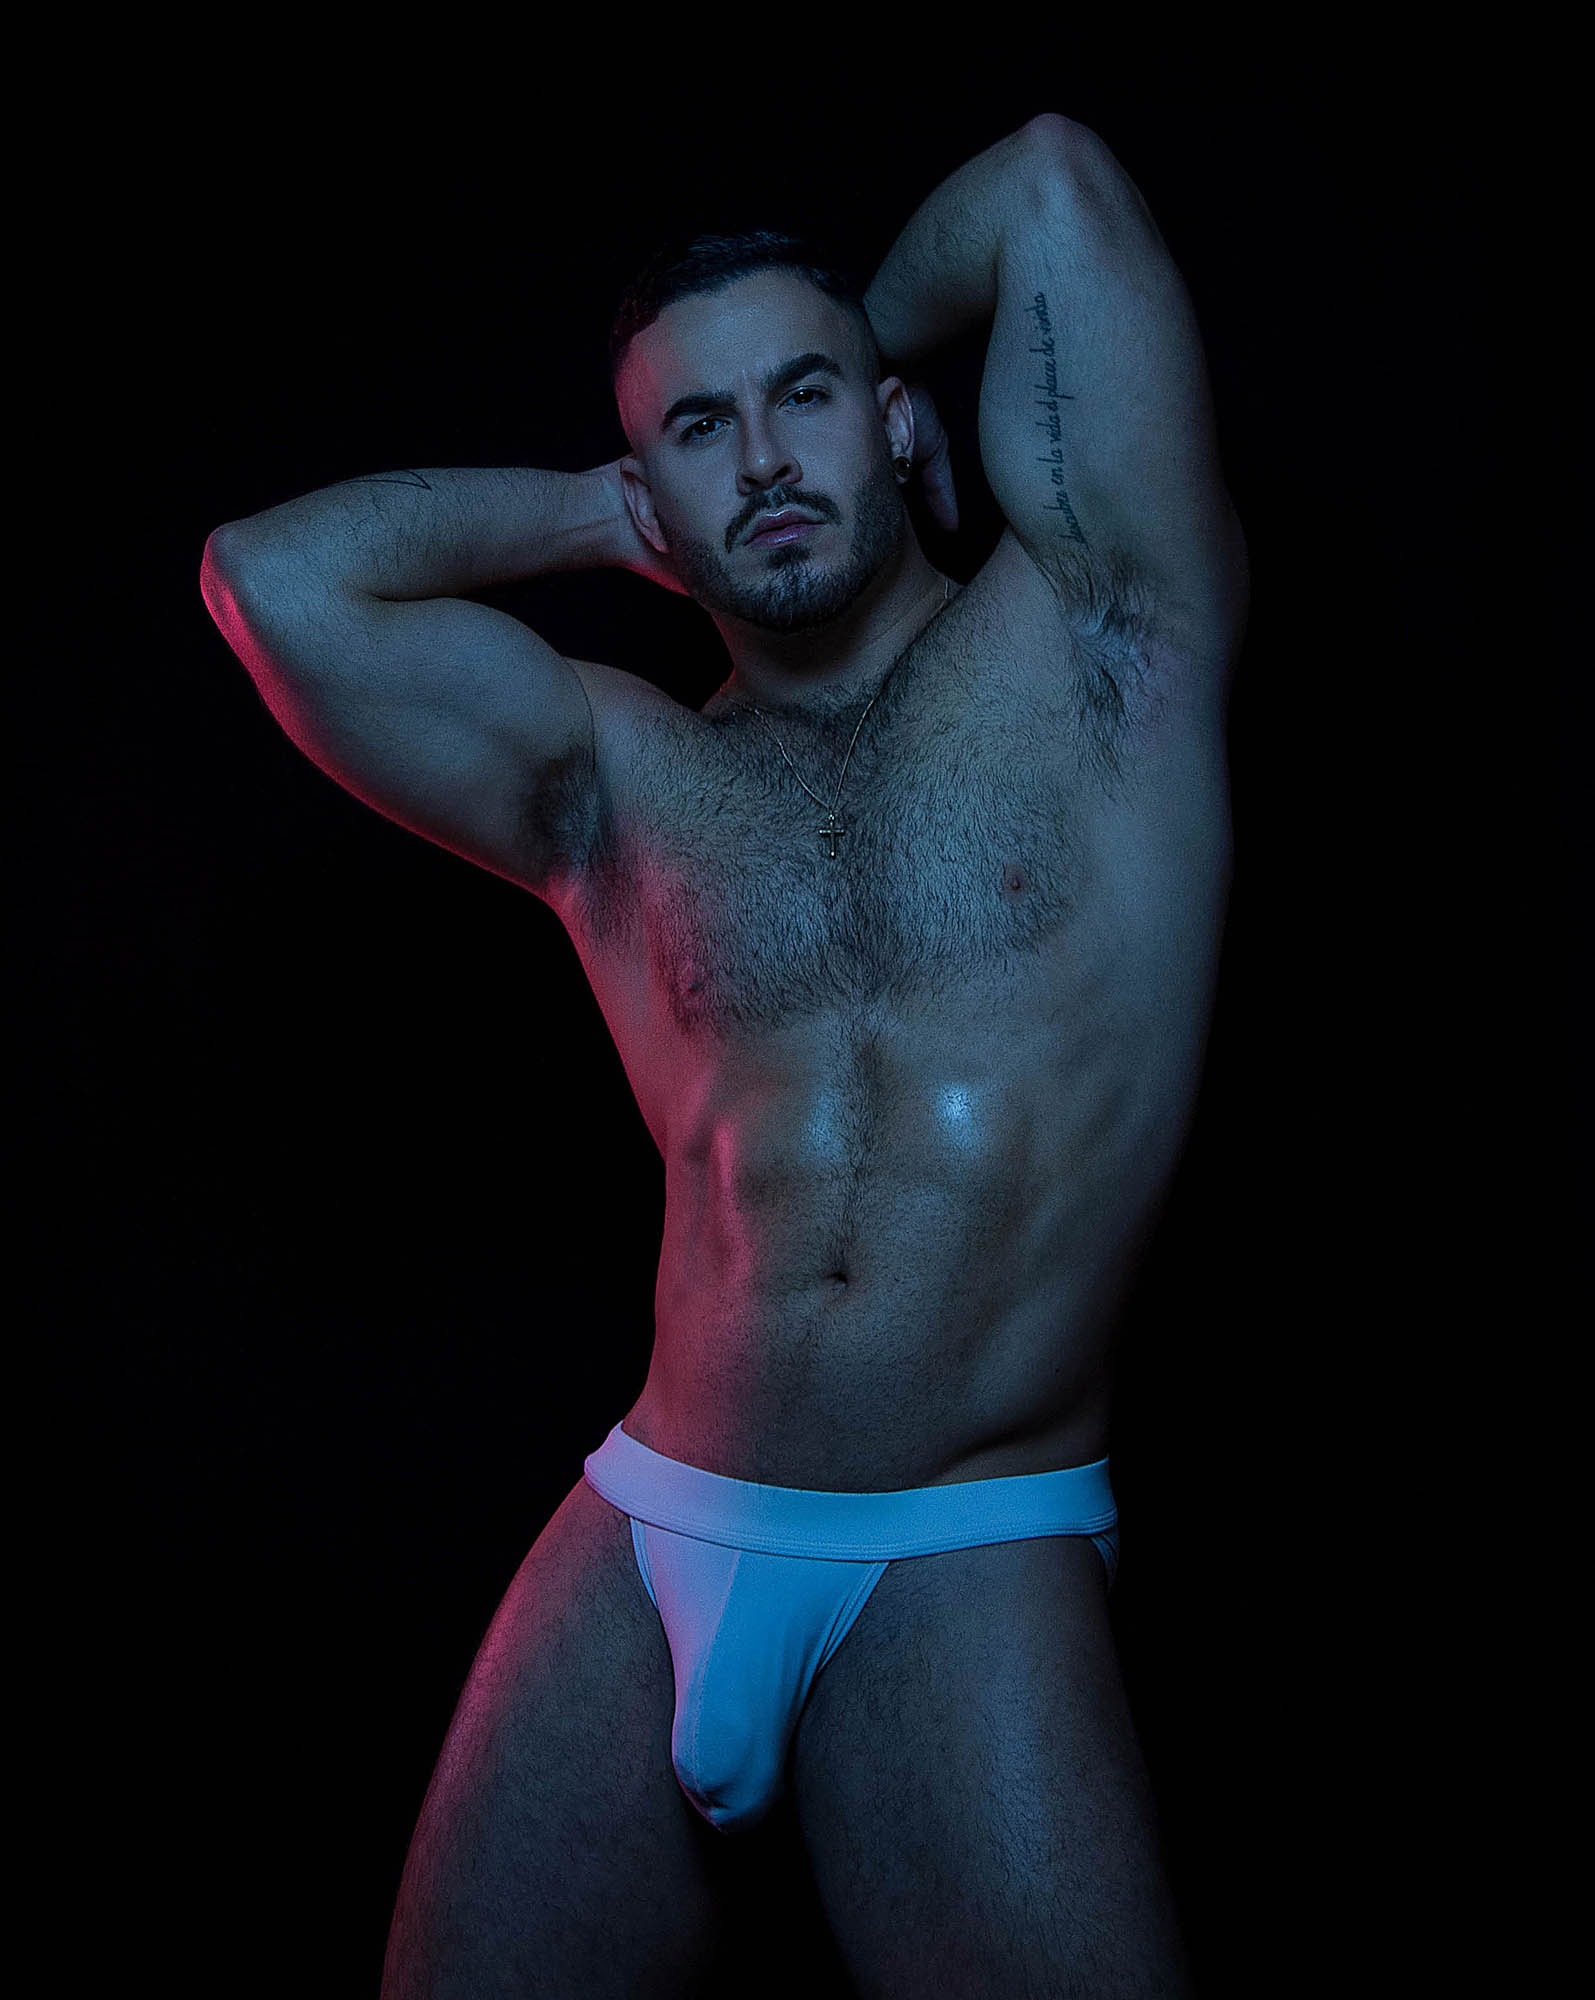 – EXCLUSIVE – Enmanuel Reyes by Inch Photography.